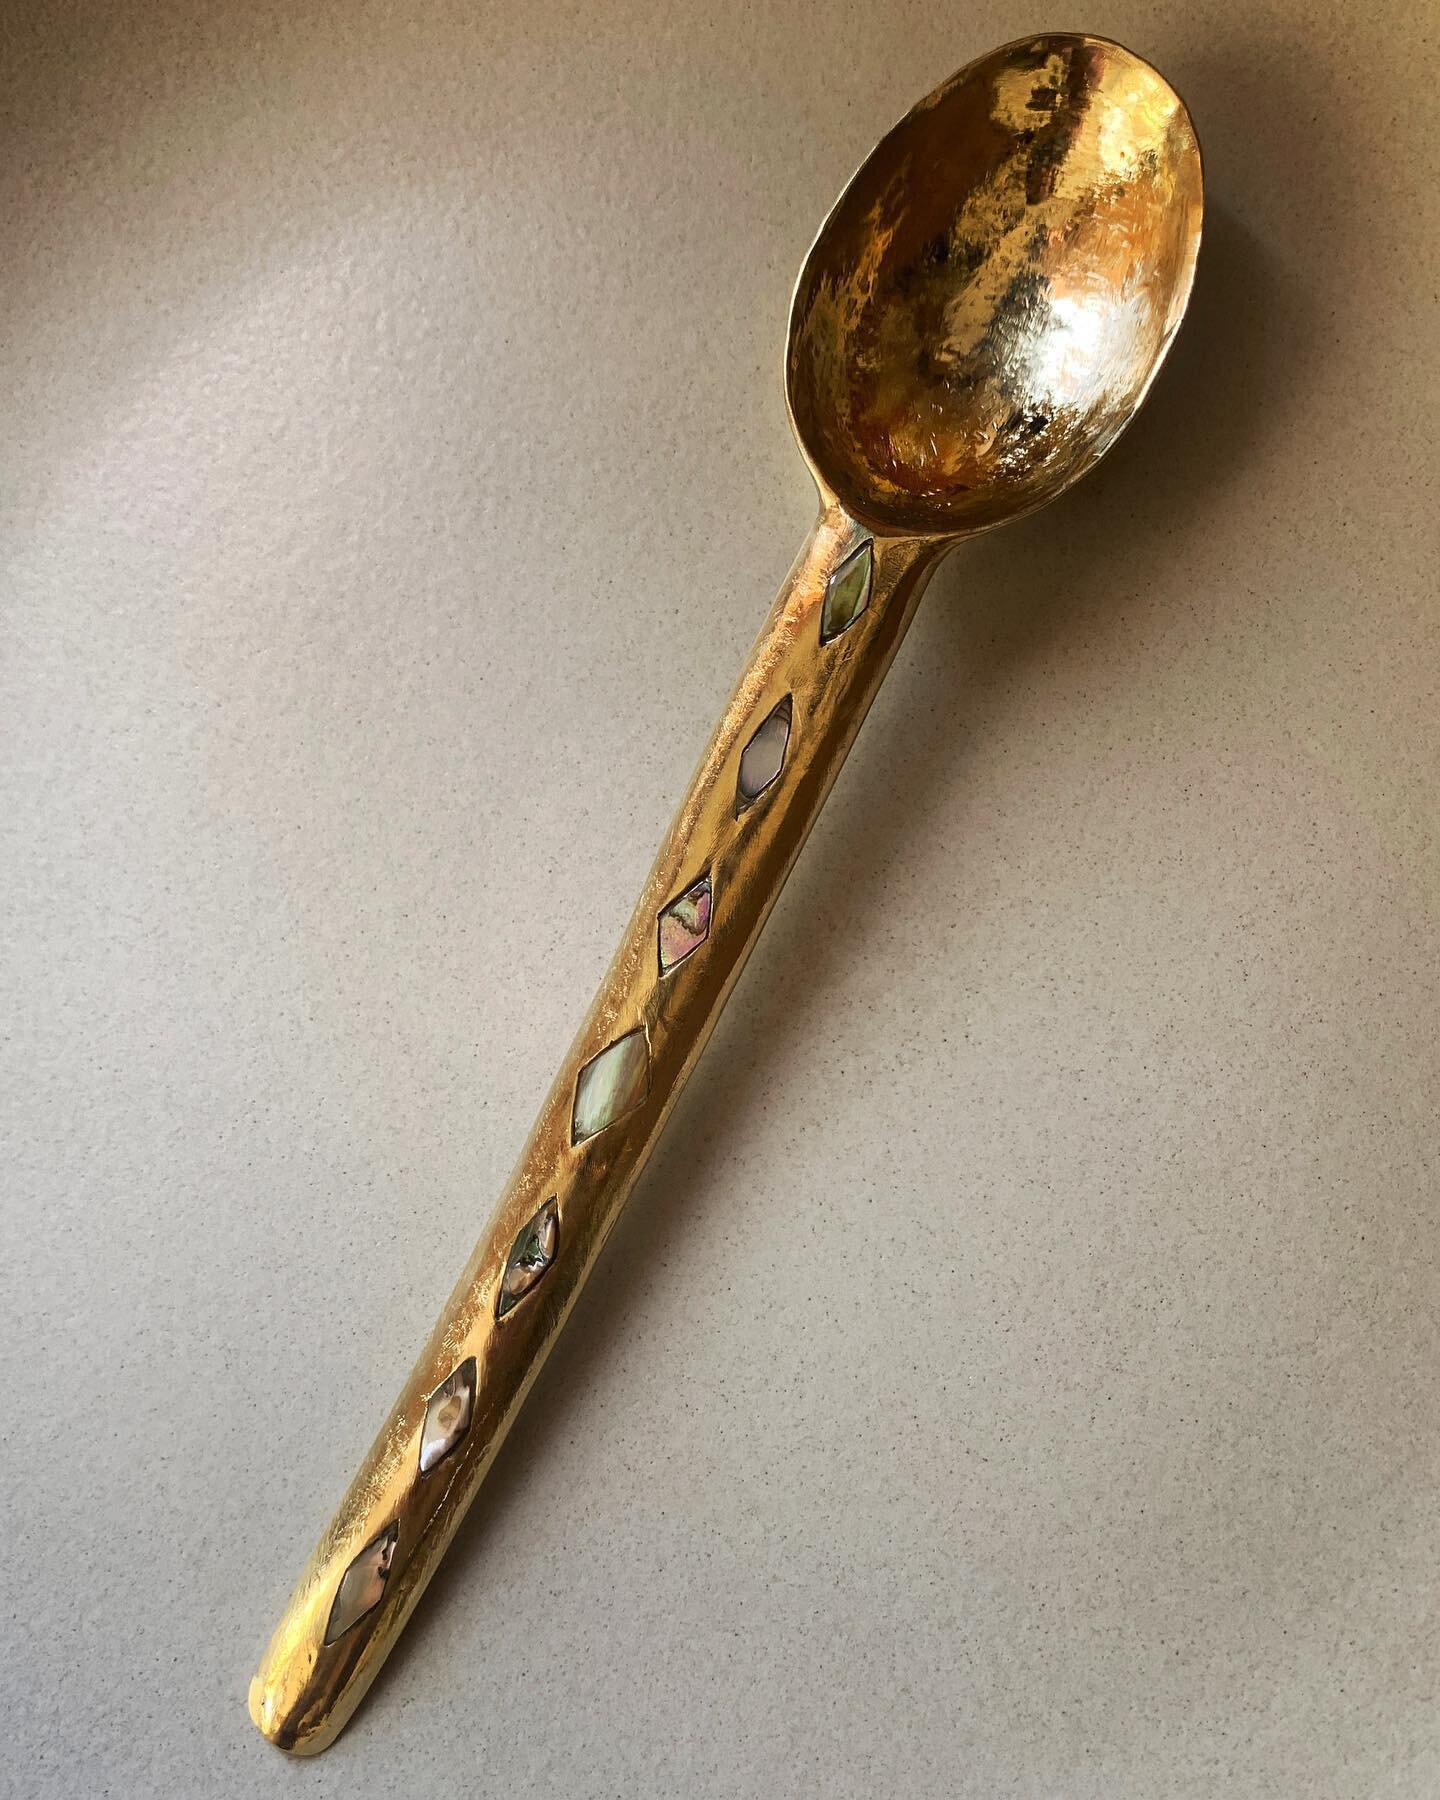 Abalone inlay spoon ! I am so excited about this spoon, I feel like this object somehow created itself. I was just the conduit. Now available on the site in new arrivals.